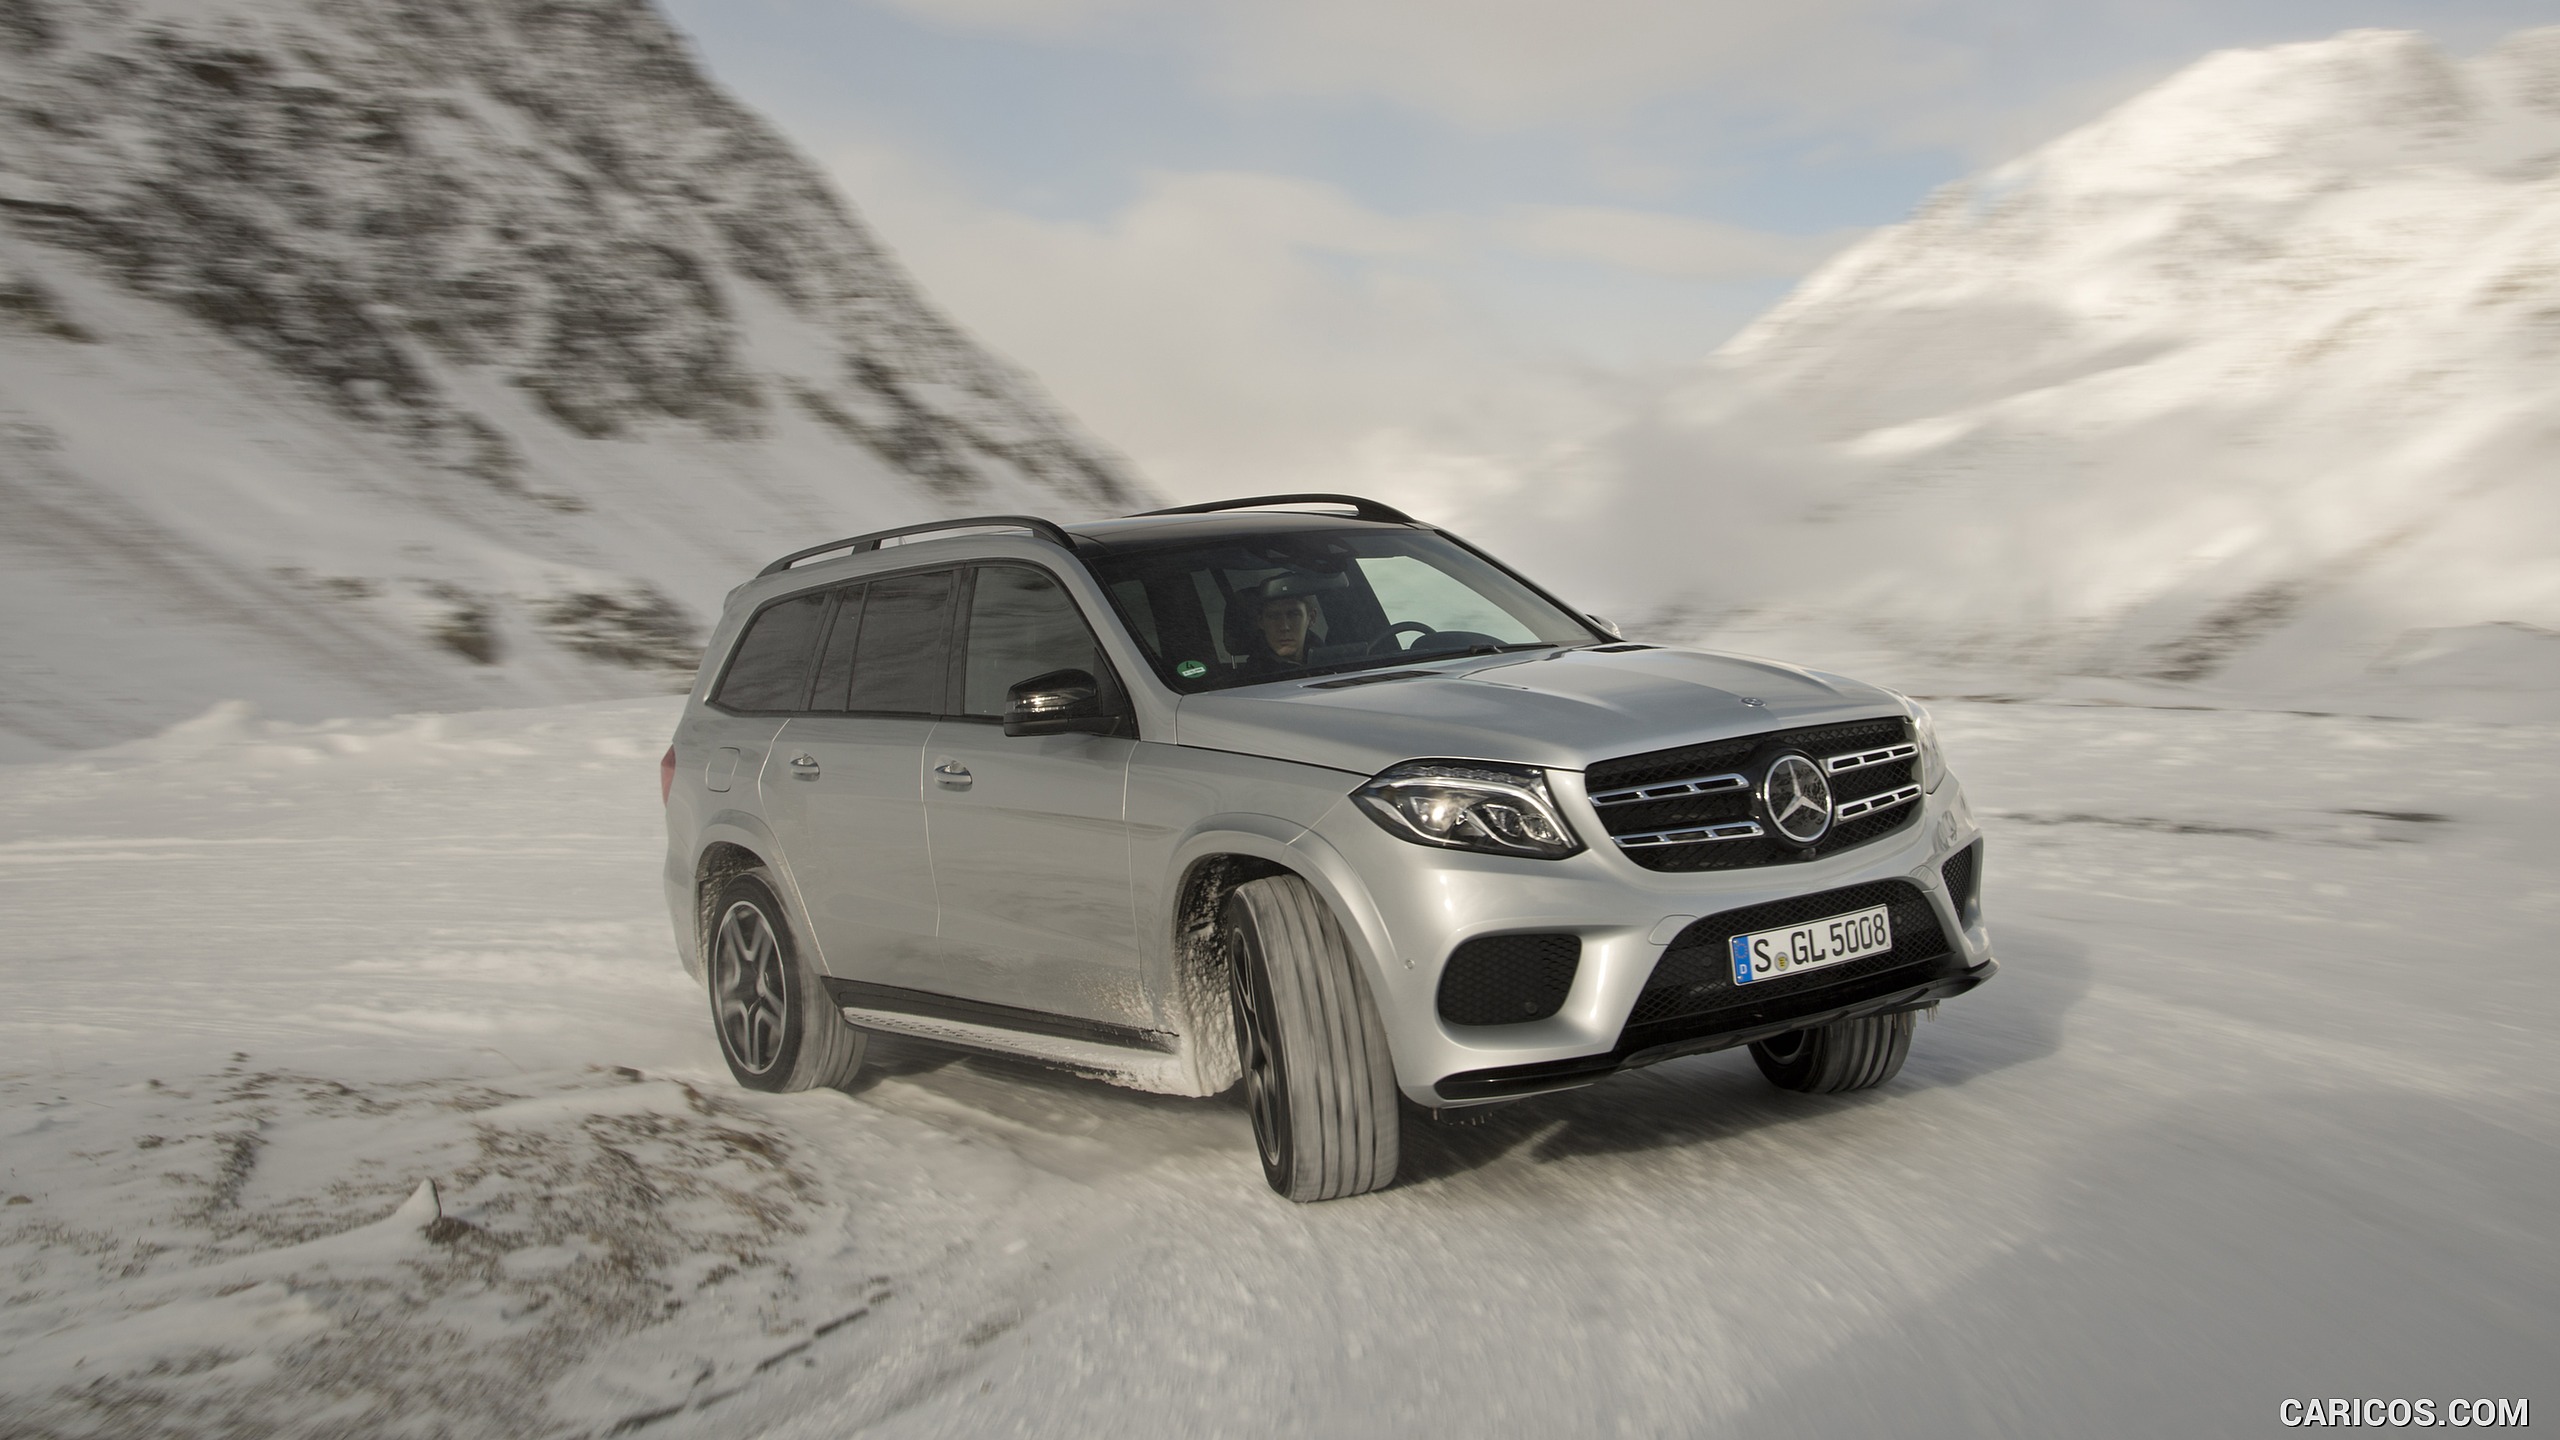 2017 Mercedes-Benz GLS 500 4MATIC AMG Line in Snow - Front, #126 of 255